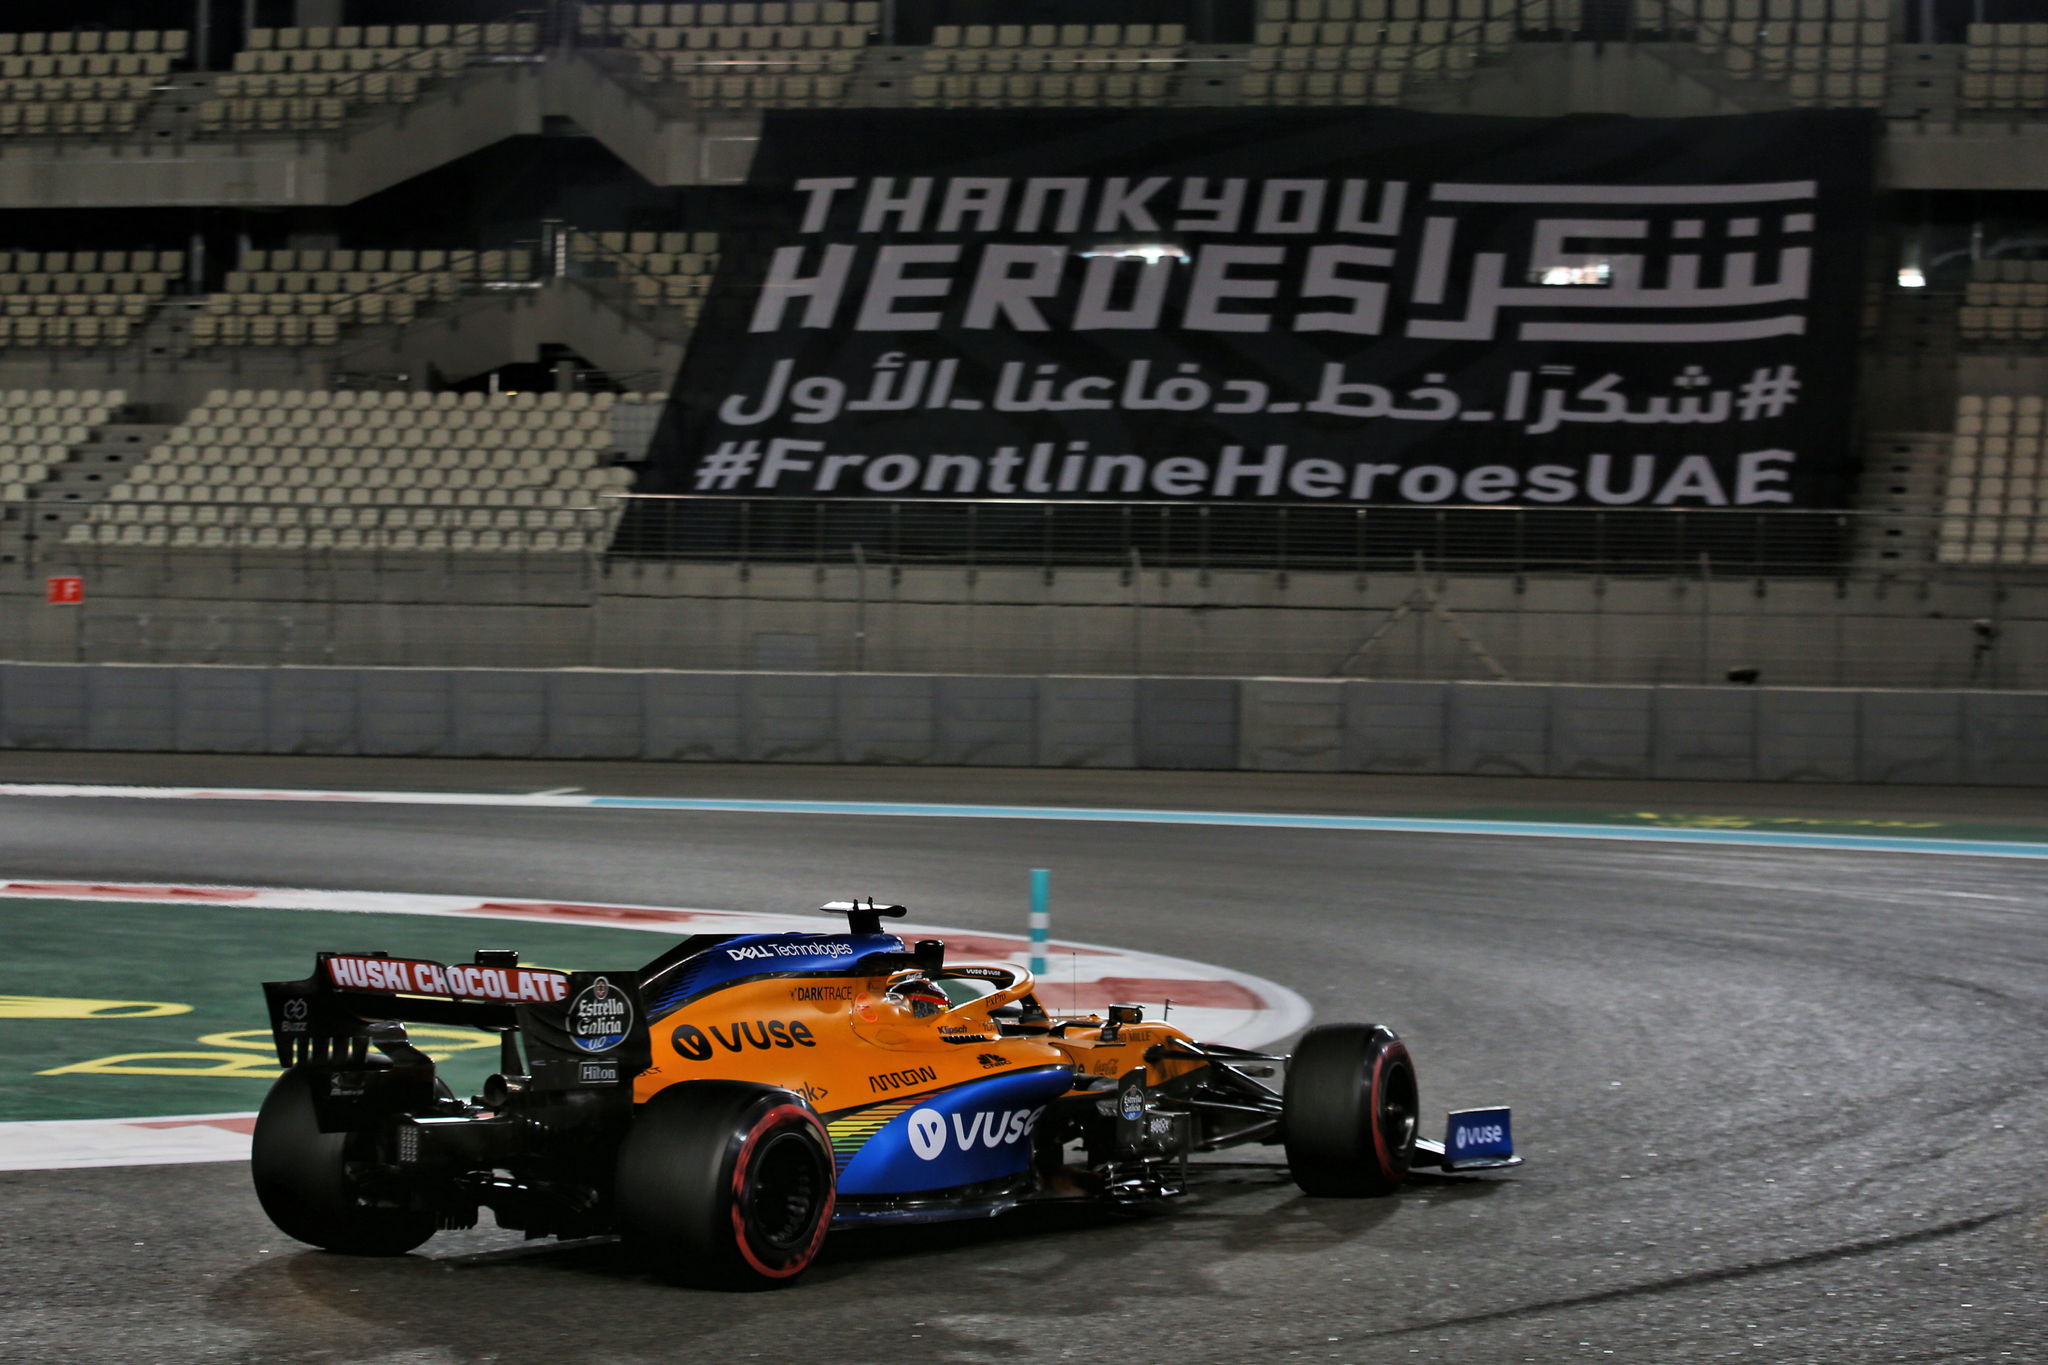 Abu Dhabi (United Arab Emirates), 11/12/2020.- A handout photo made available by the FIA of Spanish Formula One driver lt;HIT gt;Carlos lt;/HIT gt; lt;HIT gt;Sainz lt;/HIT gt; of McLaren in action during the second practice session of the Formula One Grand Prix of Abu Dhabi at Yas Marina Circuit in Abu Dhabi, United Arab Emirates, 11 December 2020. The Formula One Grand Prix of Abu Dhabi will take place on 13 December 2020. (Fórmula Uno, Emiratos Árabes Unidos) EFE/EPA/FIA/F1 HANDOUT HANDOUT EDITORIAL USE ONLY/NO SALES *** Local Caption *** BAHRAIN, BAHRAIN - NOVEMBER 26: gt; during previews ahead of the F1 Grand Prix of Bahrain at Bahrain International Circuit on November 26, 2020 in Bahrain, Bahrain. (Photo by Rudy Carezzevoli/Getty Images)